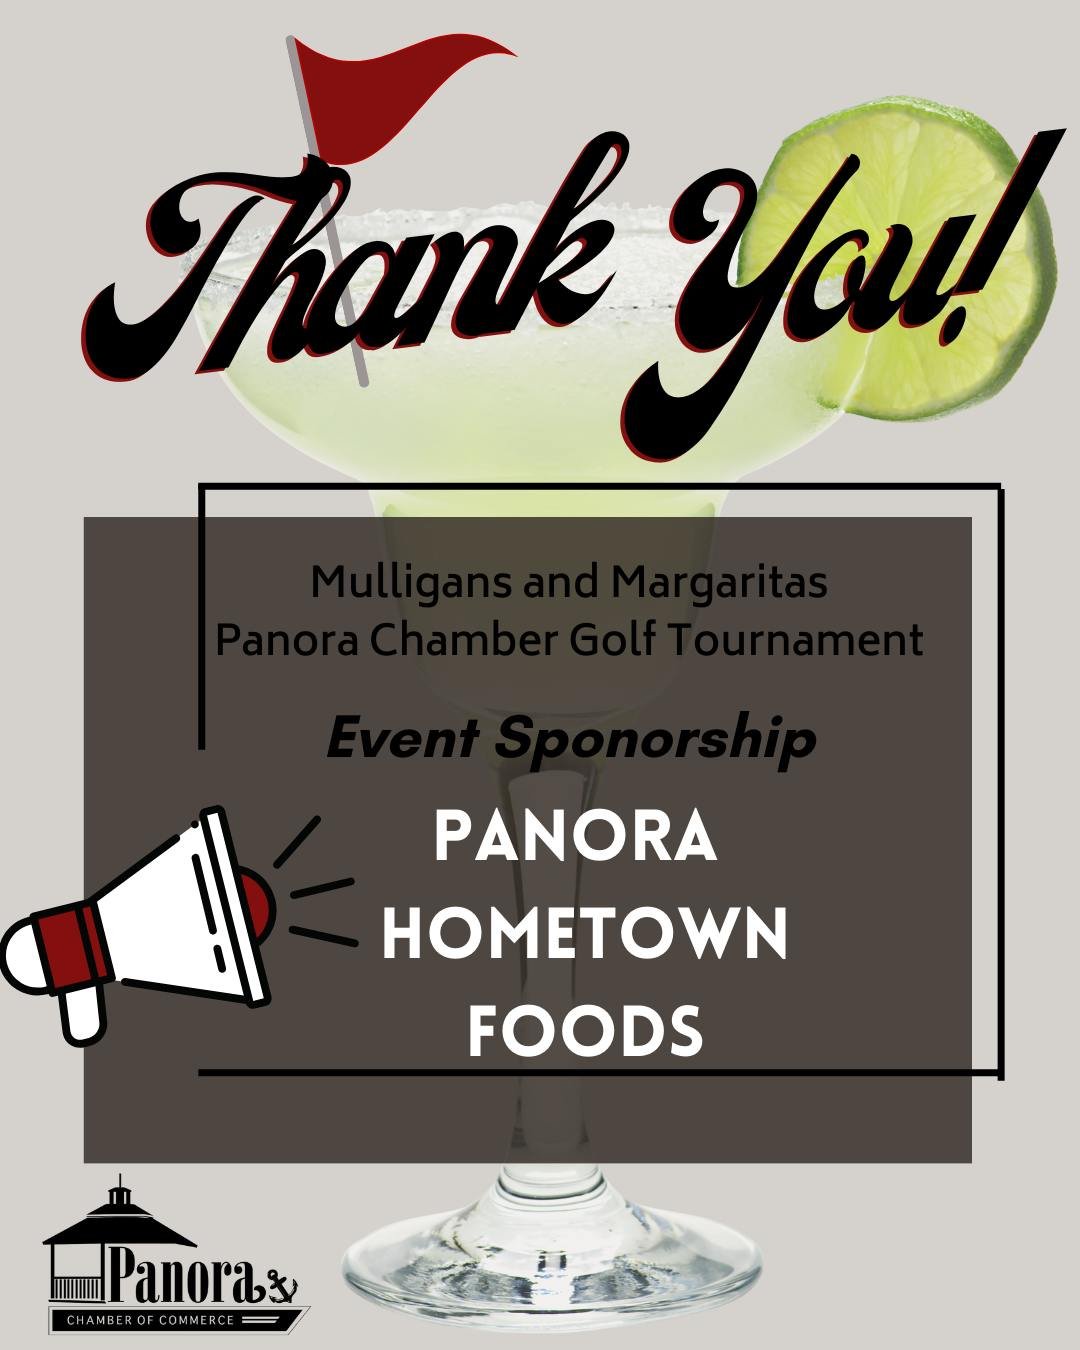 🌟 Event Sponosor Shout-Out! 🌟

We've officially sealed the deal on our last event sponsorship! 🎉 

A huge shoutout to Panora Hometown Foods for their support. 
Mulligans and Margaritas Golf Tournament committee couldn't be more grateful! 
🏌️&zwj;